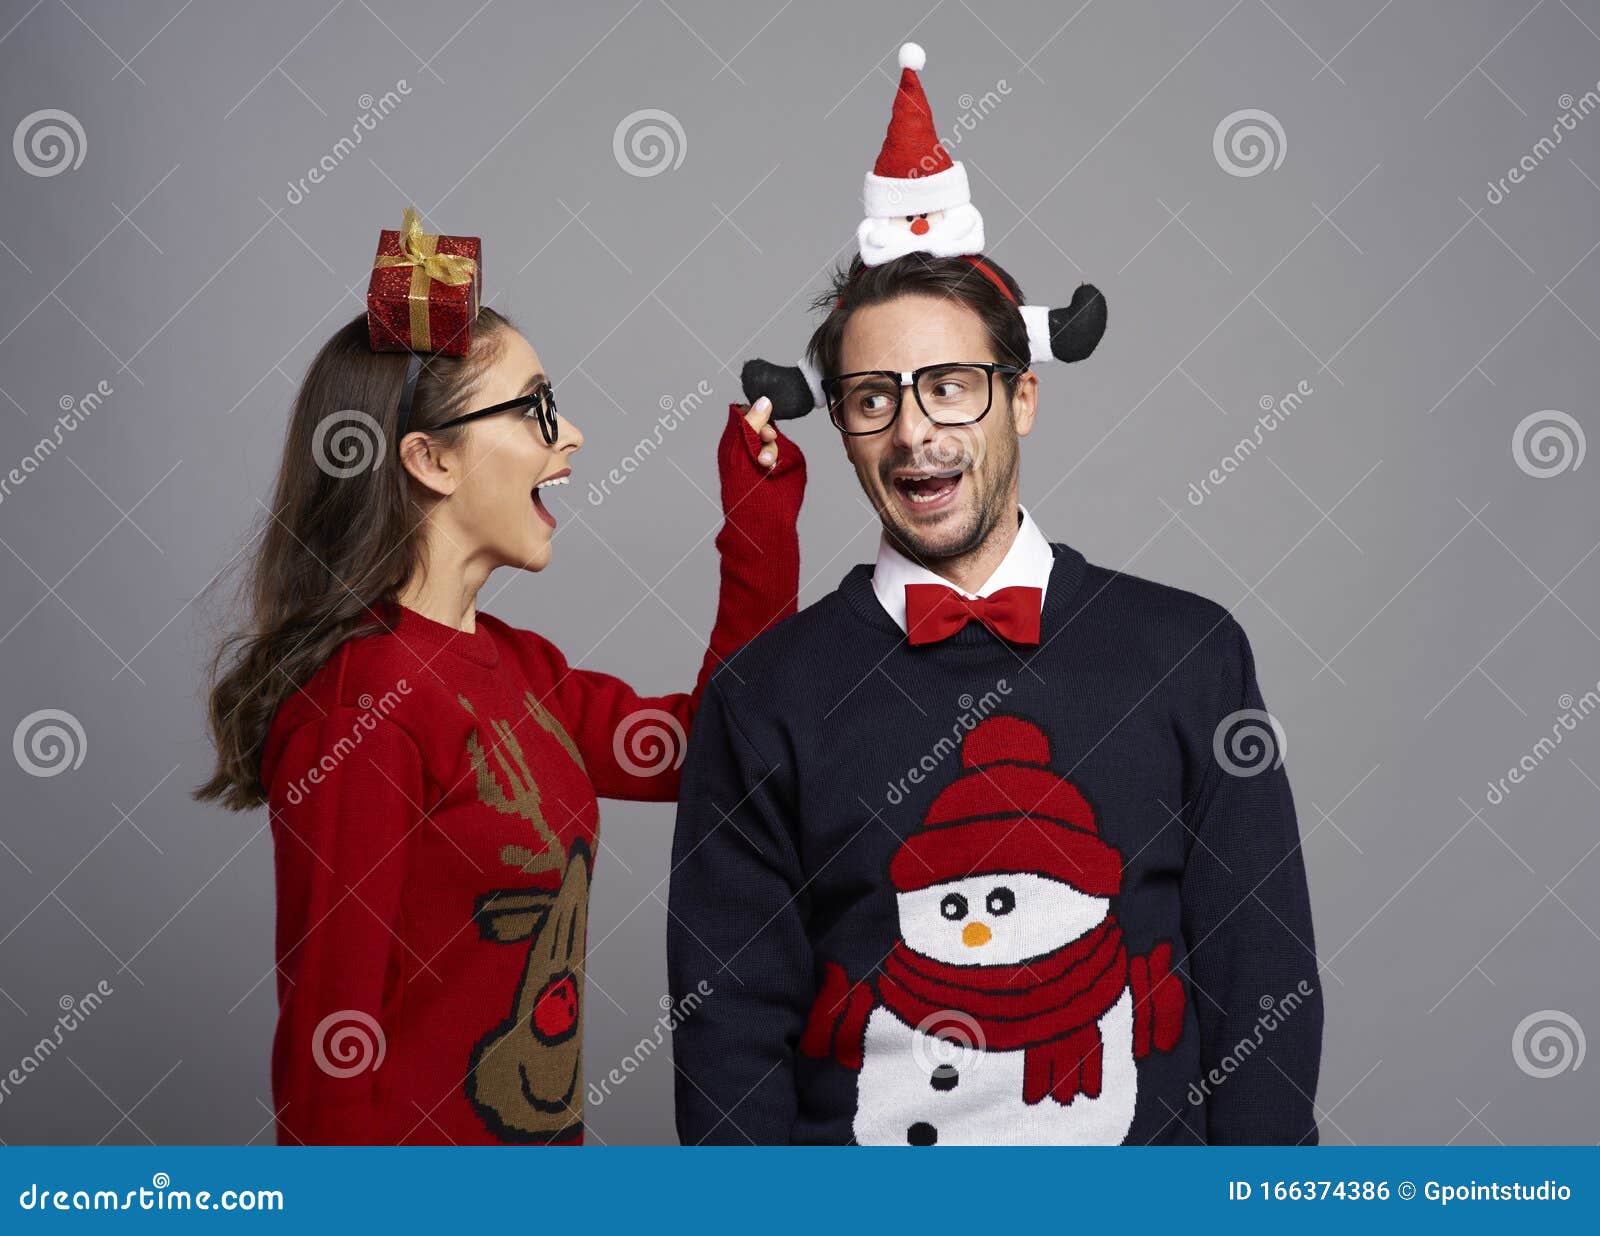 Playful Couple in Christmas Time Stock Photo - Image of adult, humor ...